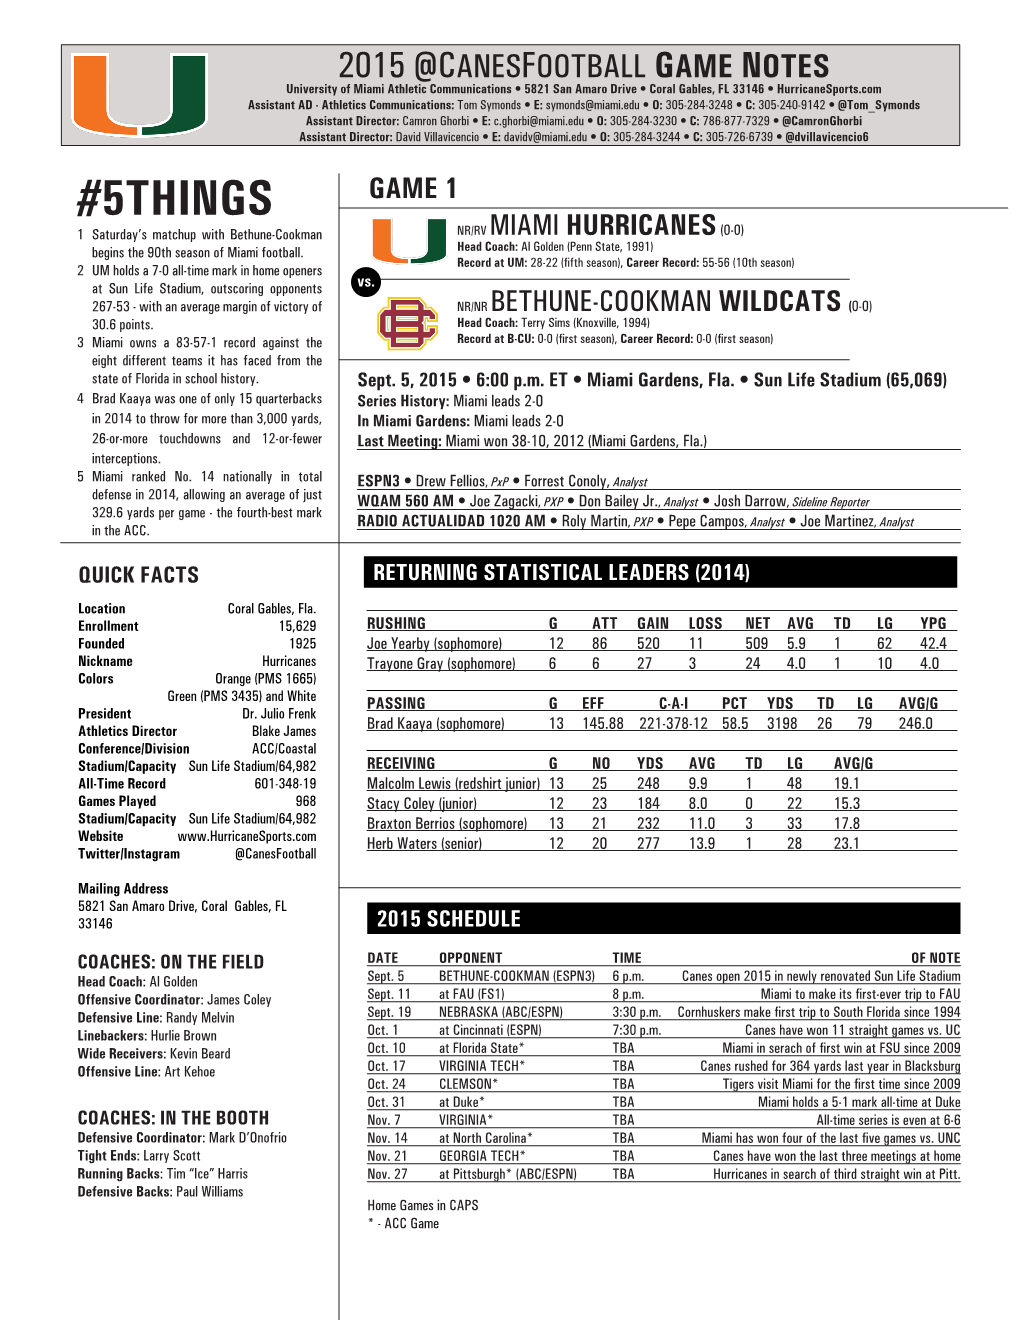 5THINGS GAME 1 1 Saturday’S Matchup with Bethune-Cookman NR/RV MIAMI HURRICANES (0-0) Begins the 90Th Season of Miami Football